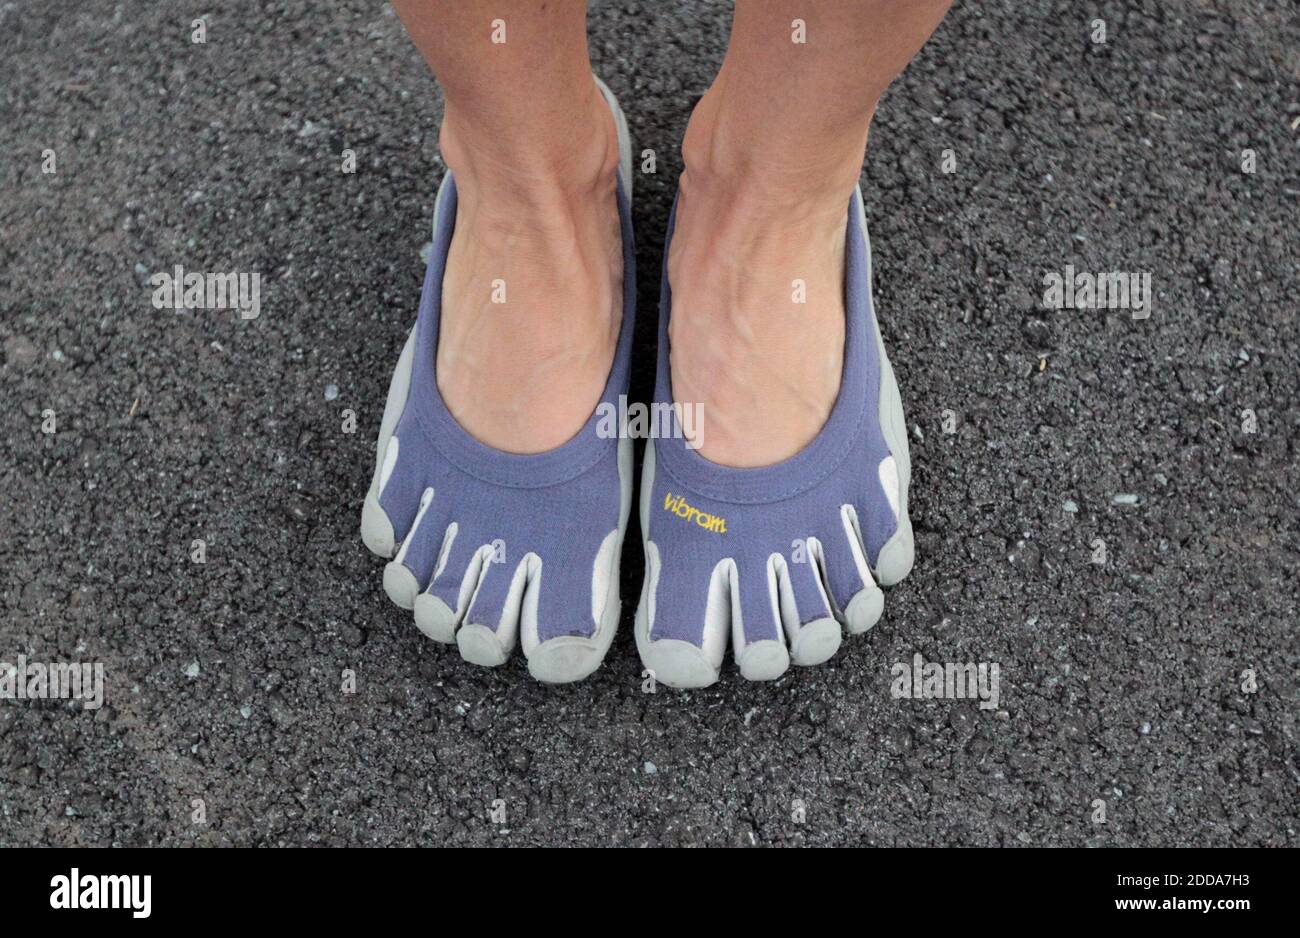 Five Finger Shoes High Resolution Stock Photography and Images - Alamy